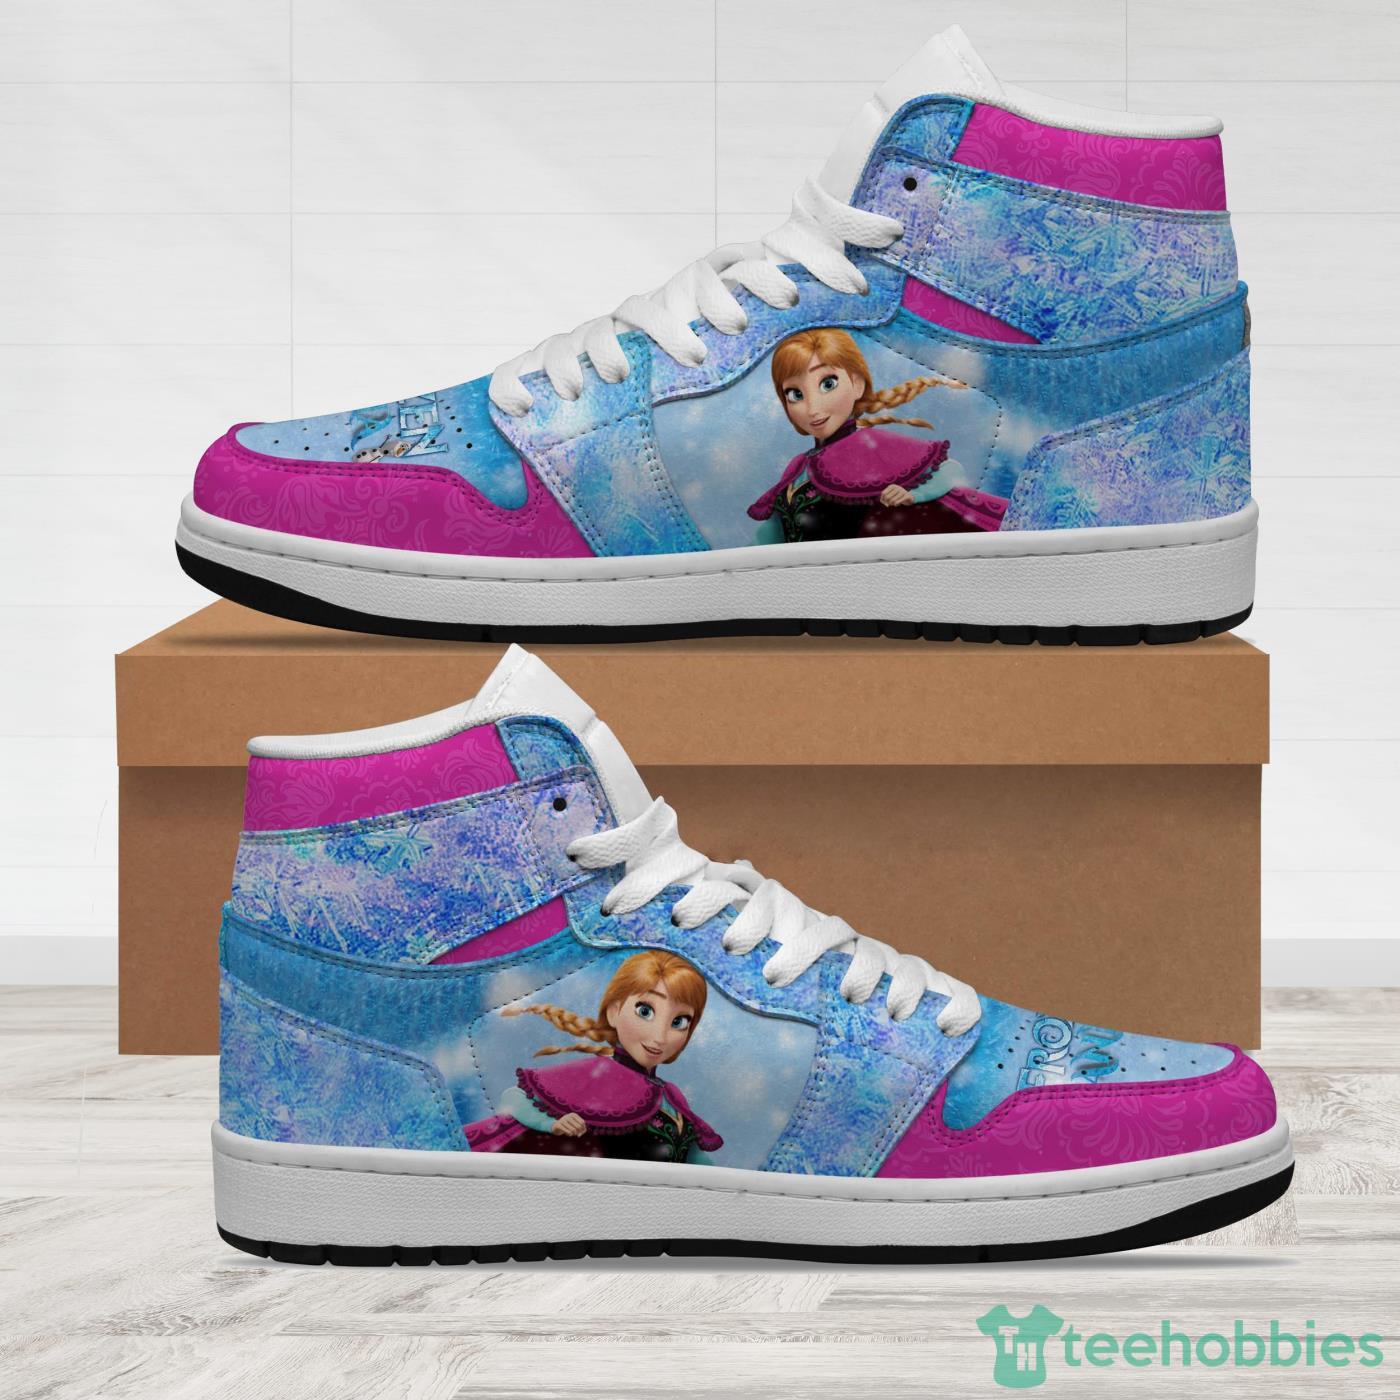 Anna sneakers